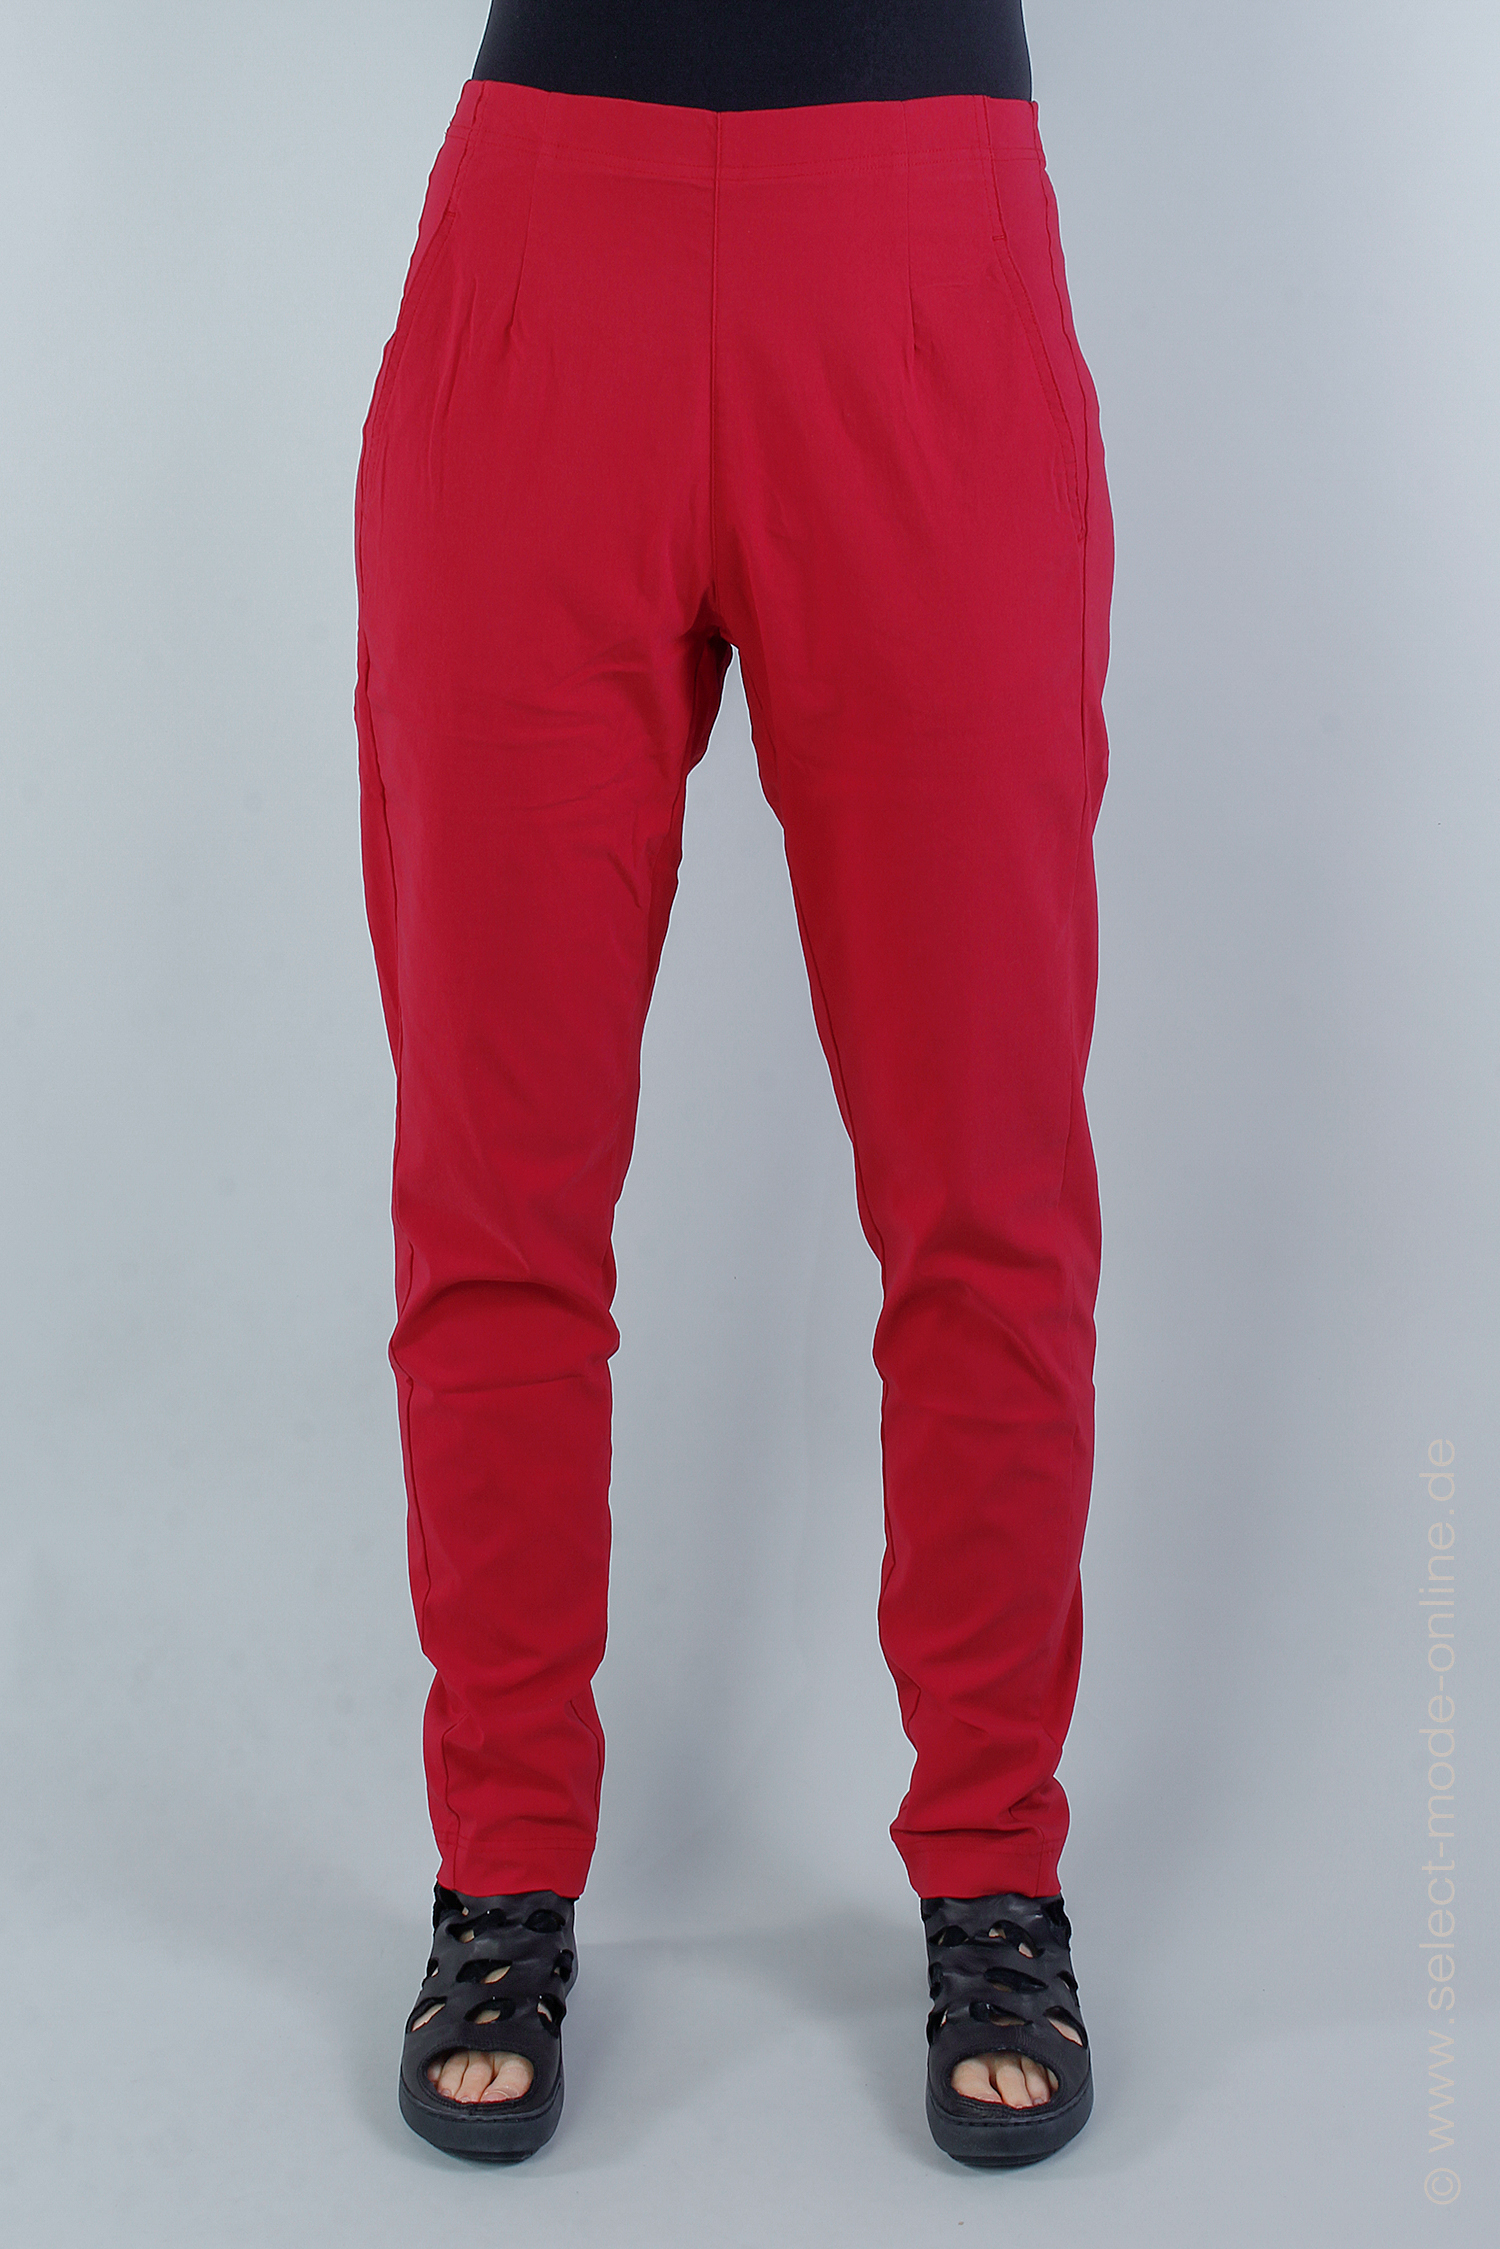 Casual stretch pants - Chili - 1243440136